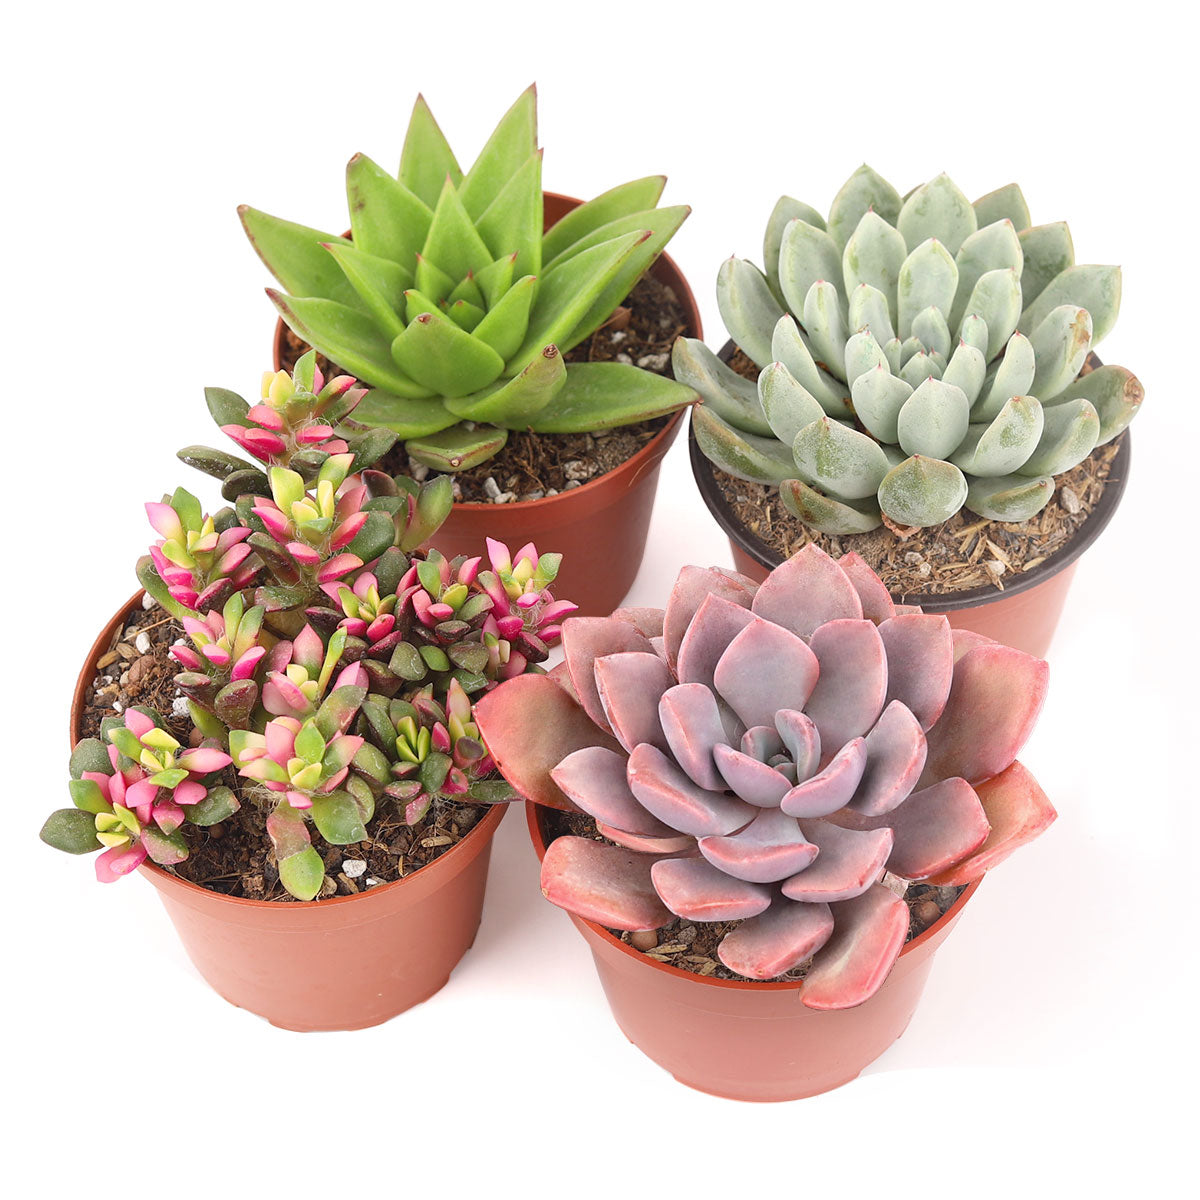 Succulent Plant Gift Ideas For Valentine's Day, Succulent Gifts for Valentine's Day, Valentine Succulent Box, Valentine's Day Succulent Delivery, Wedding rosette succulents for sale, Where to buy succulents for your wedding